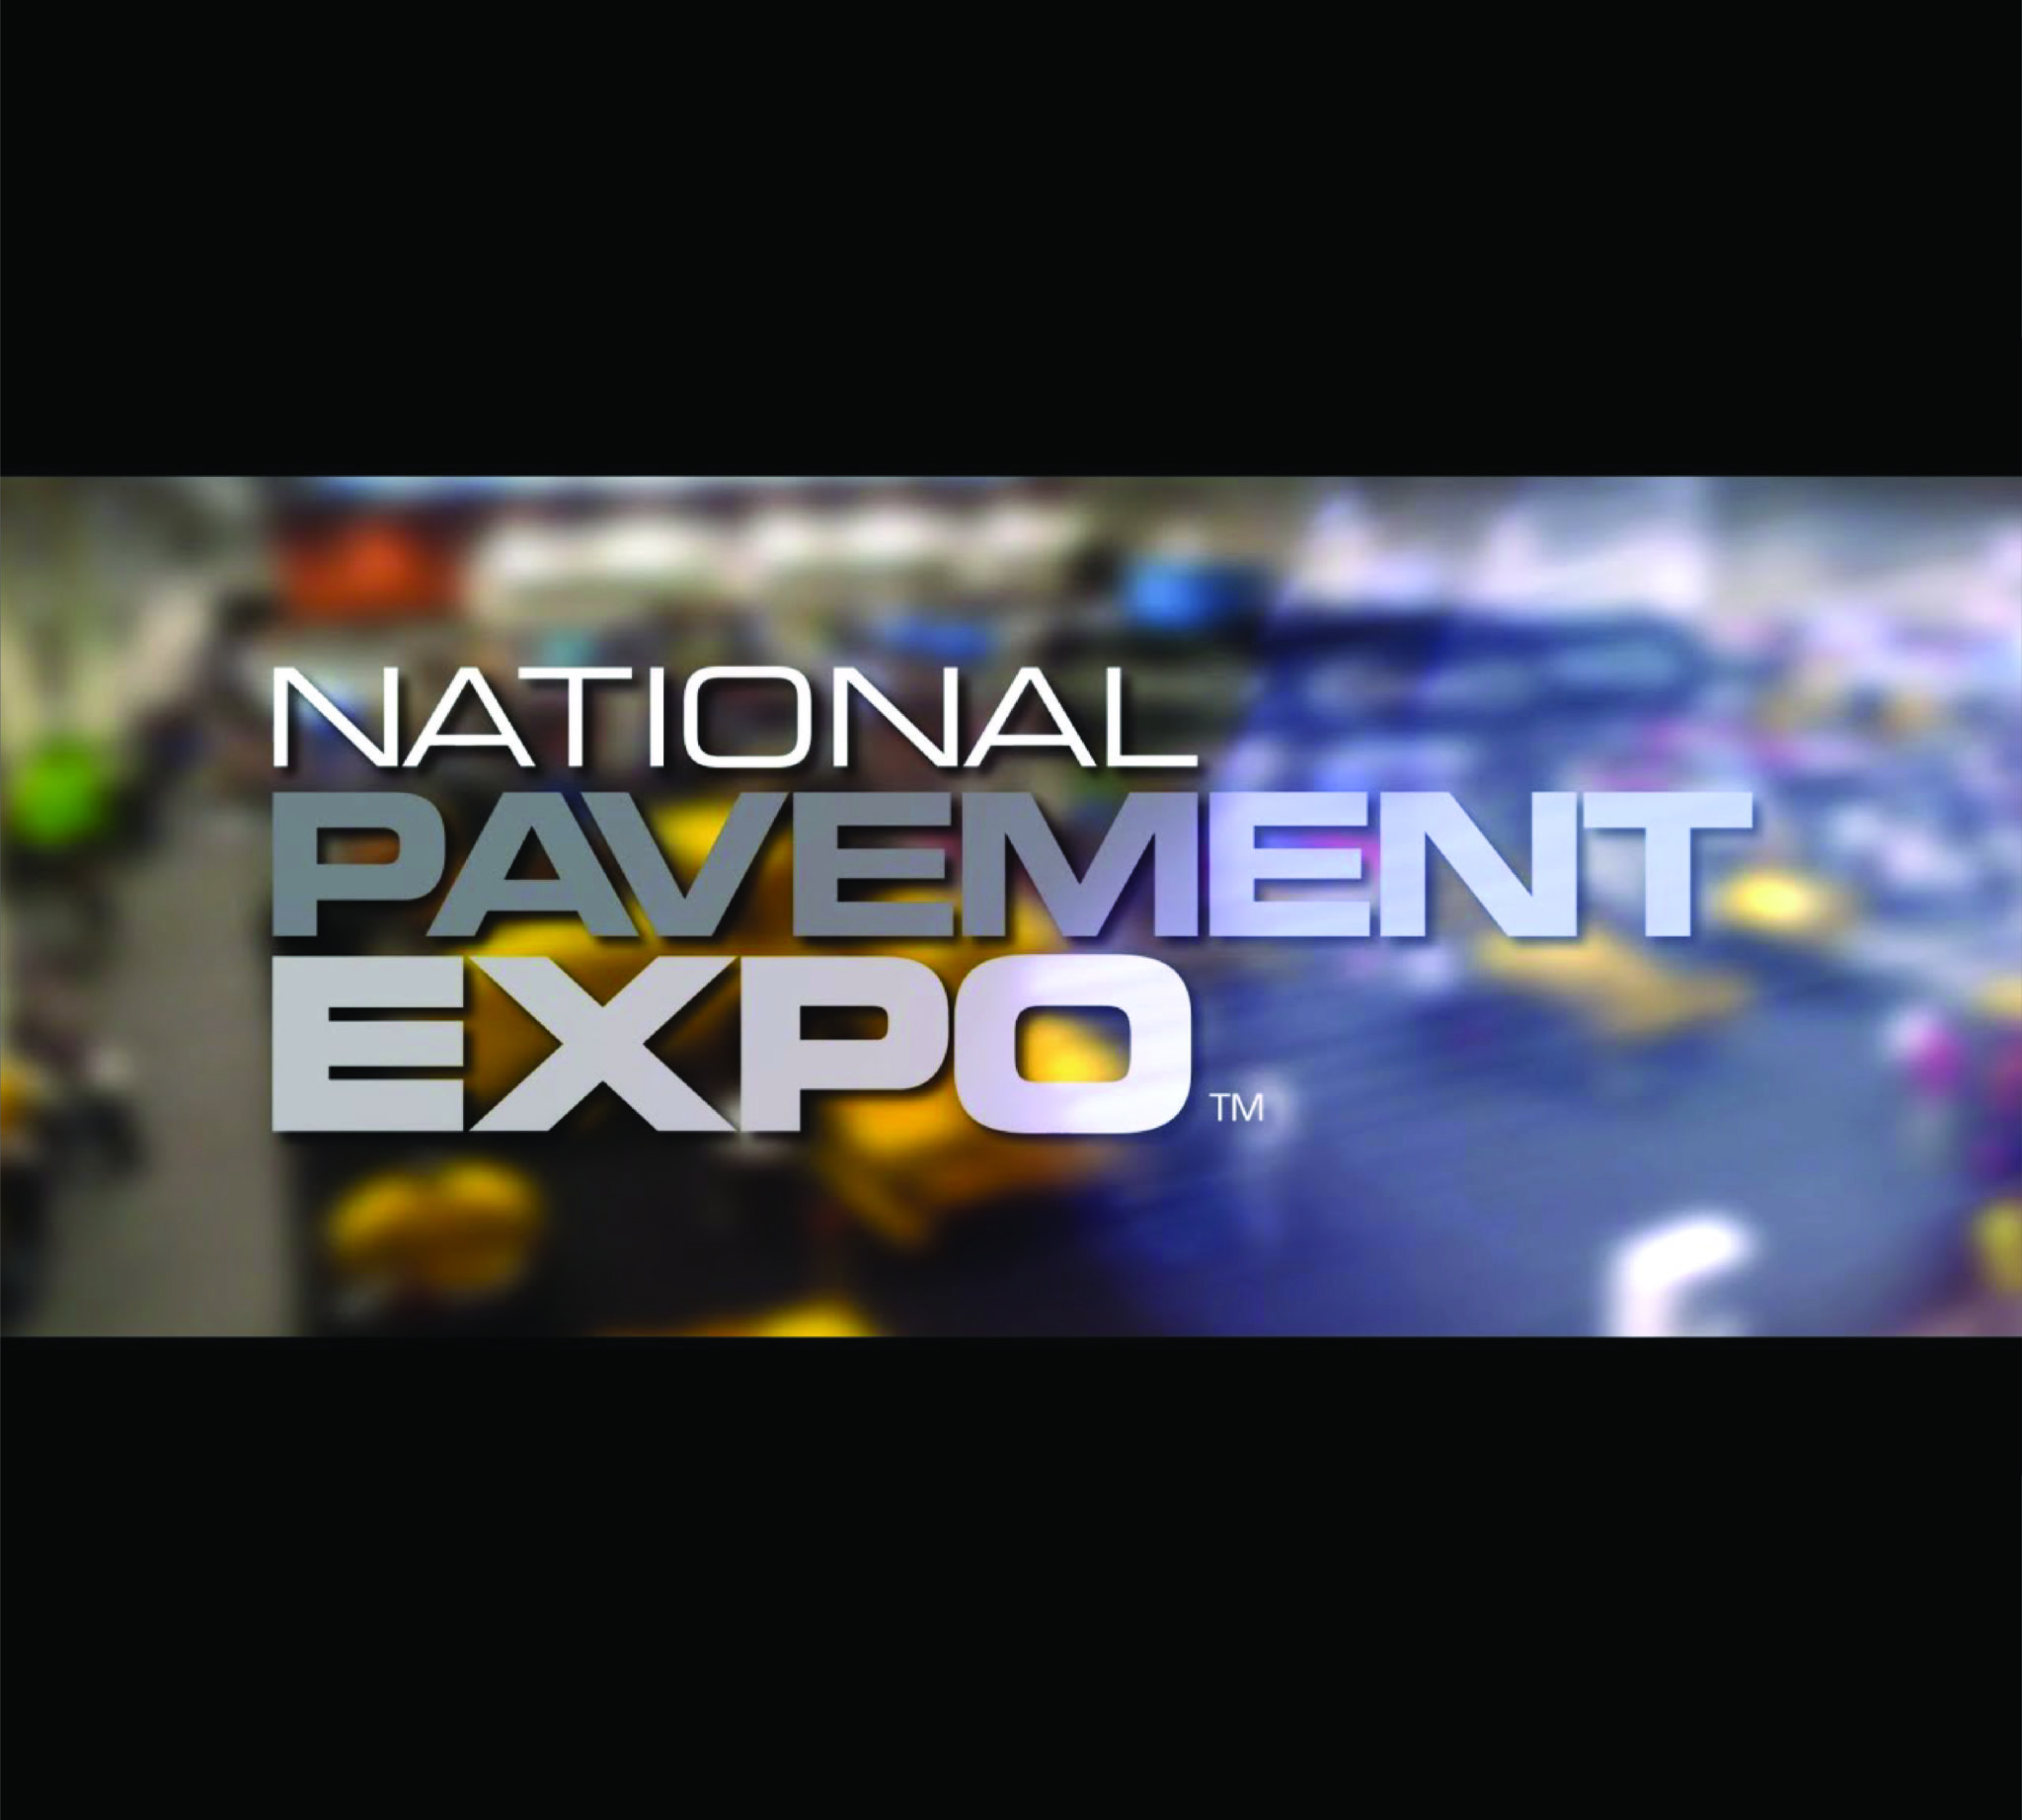 National Pavement Expo in Nashville Cutting Edge Landscape